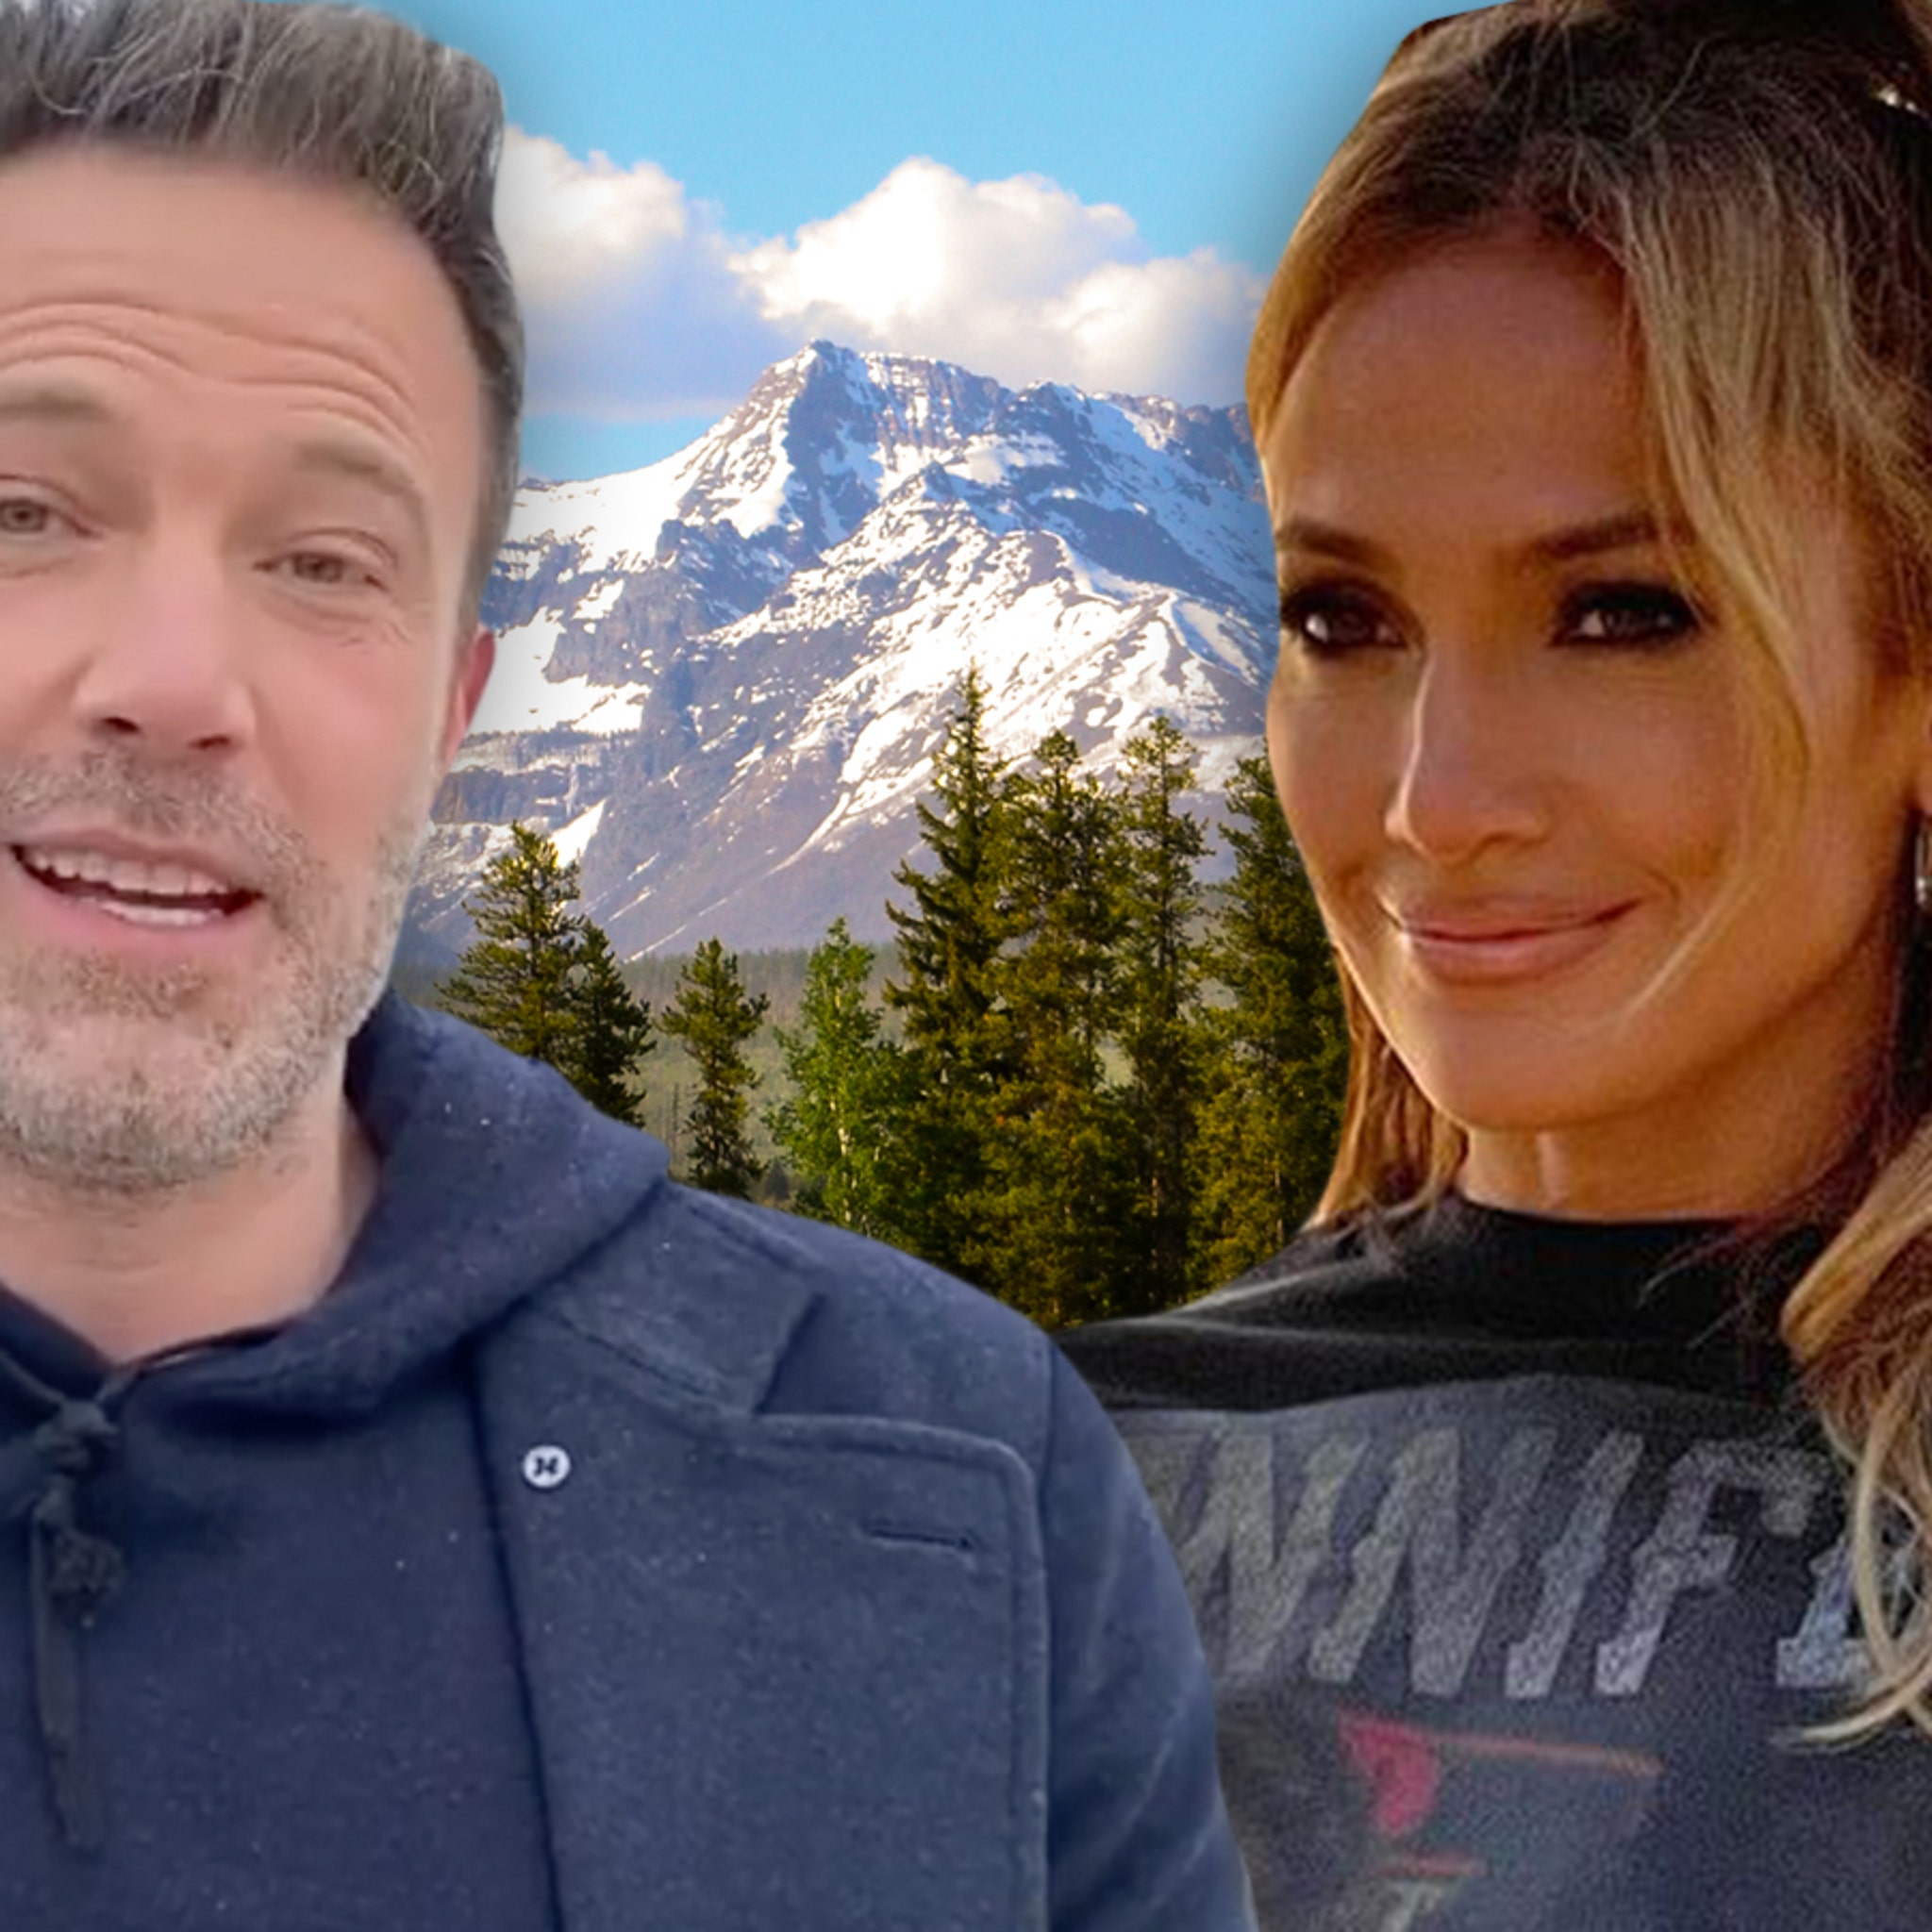 J Lo And Ben Affleck Hanging Out In Montana